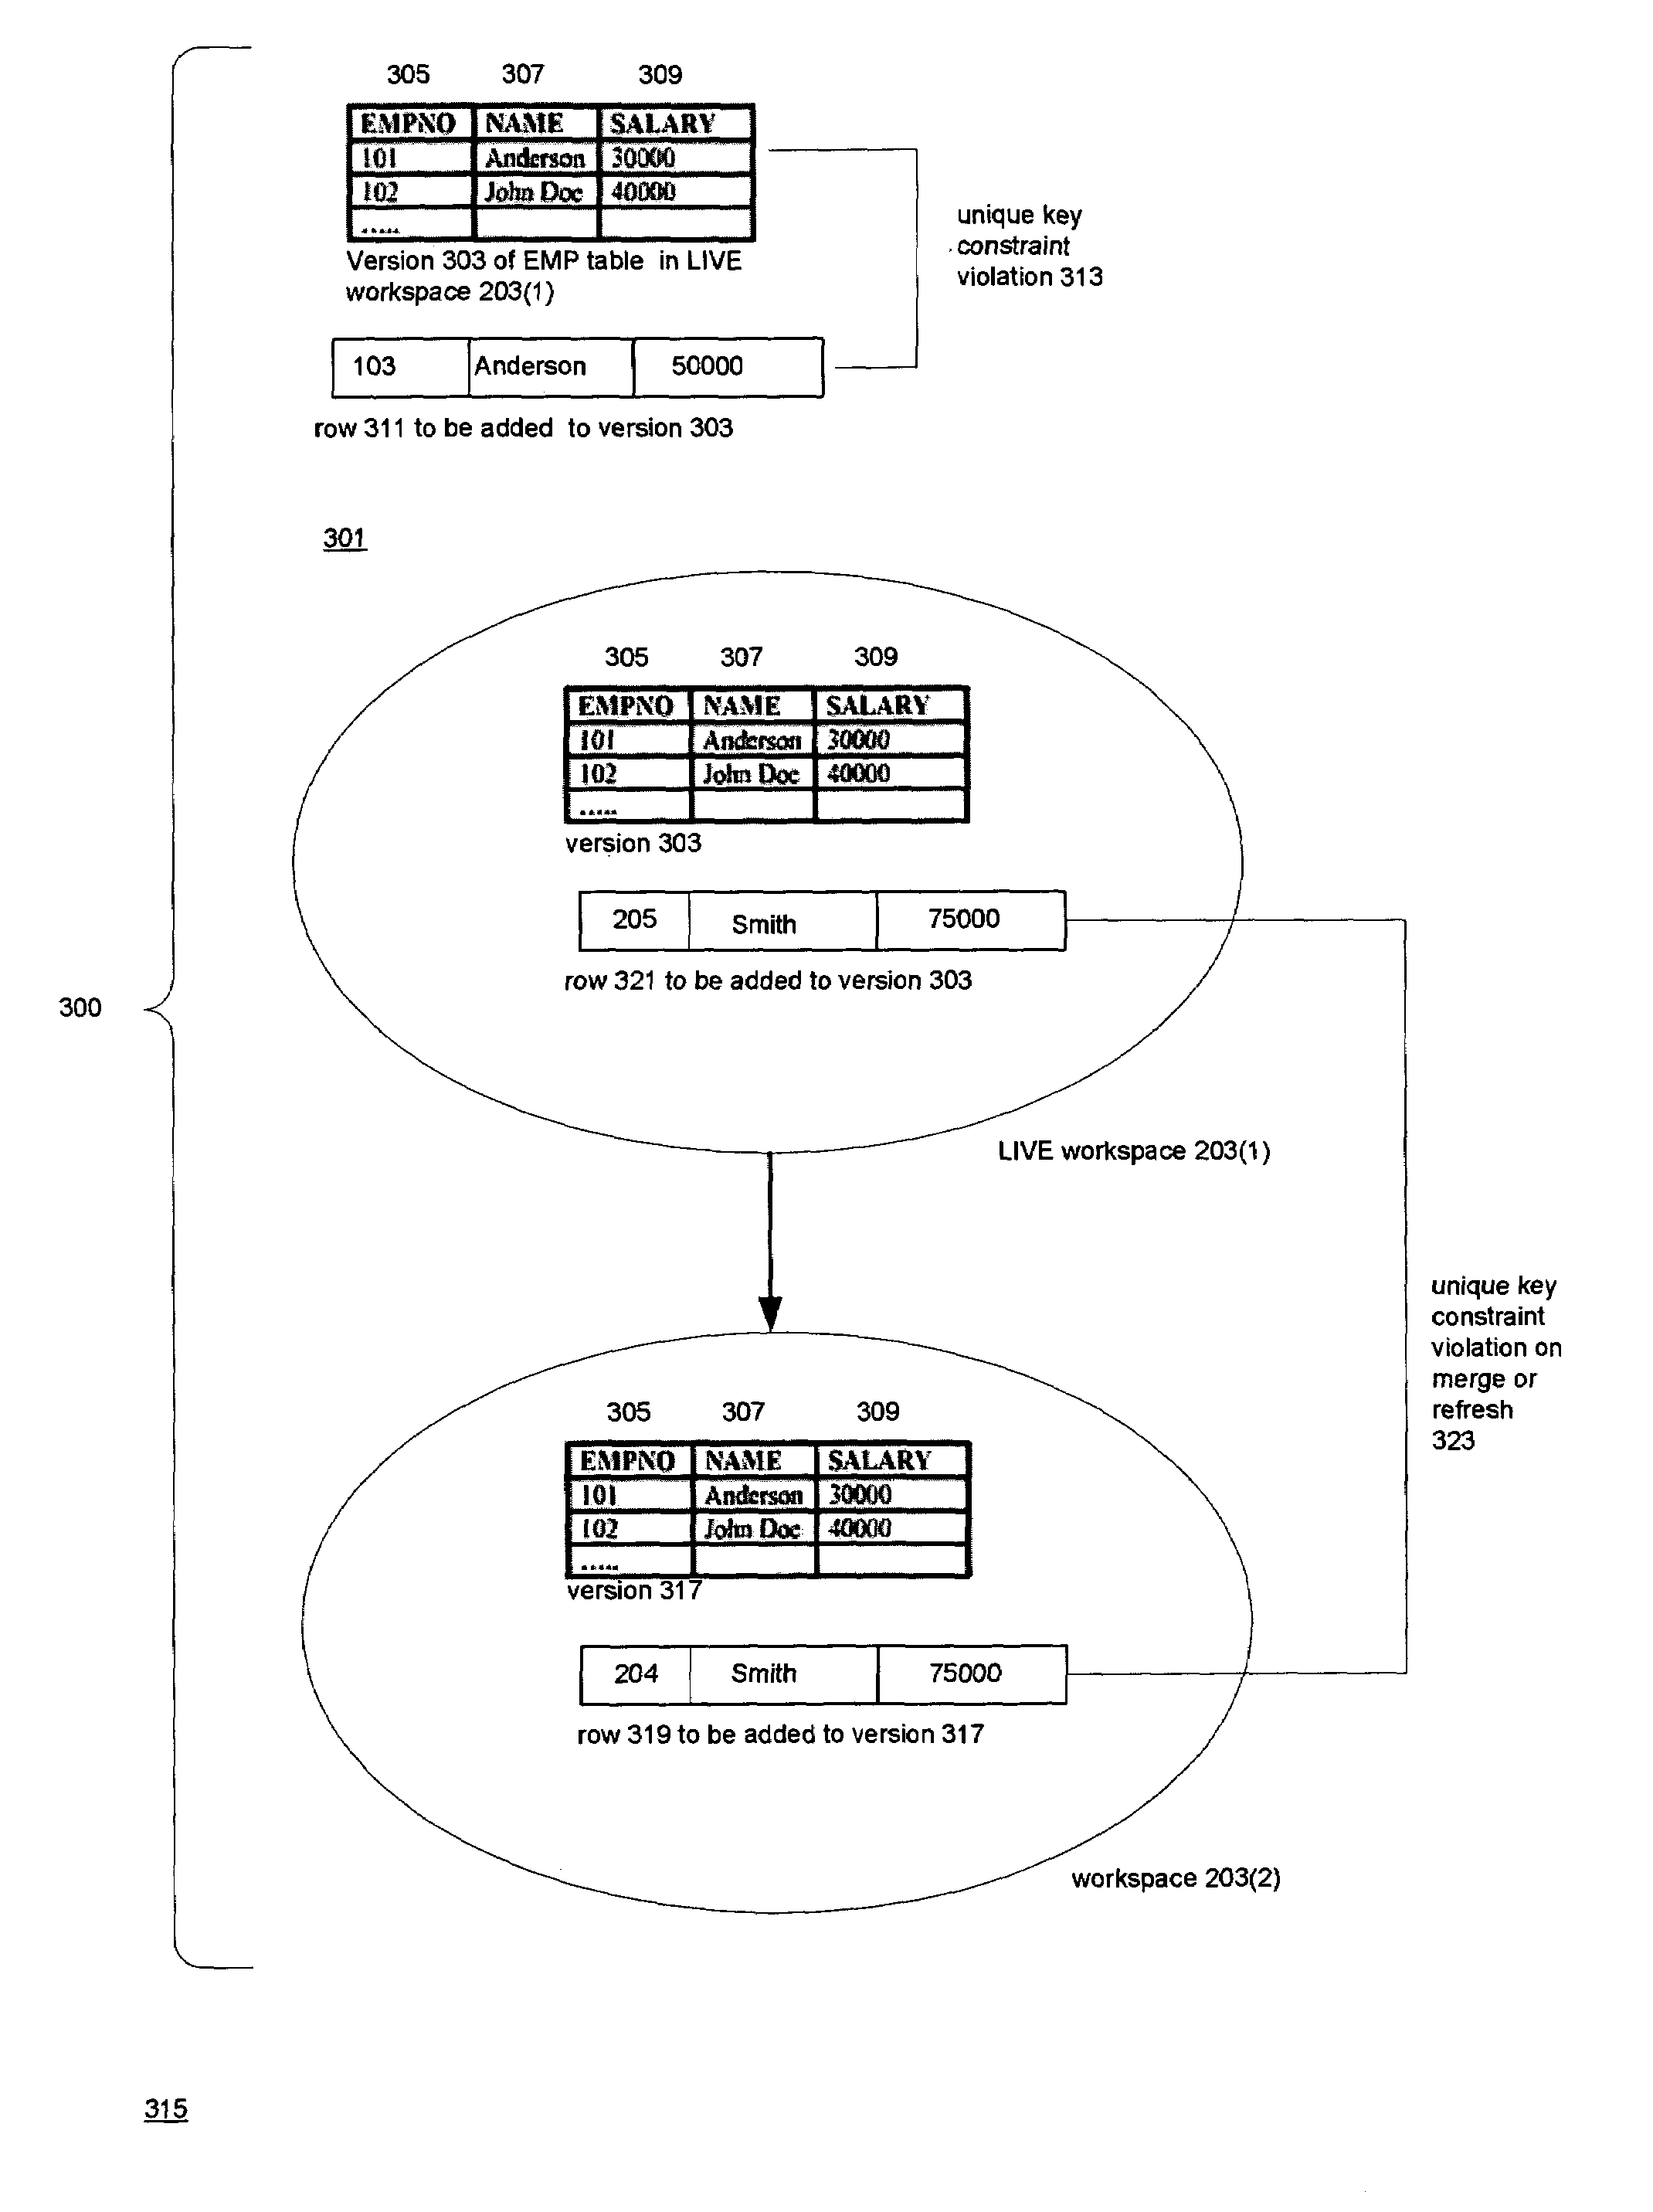 Versioned relational database system with an optimistic constraint model